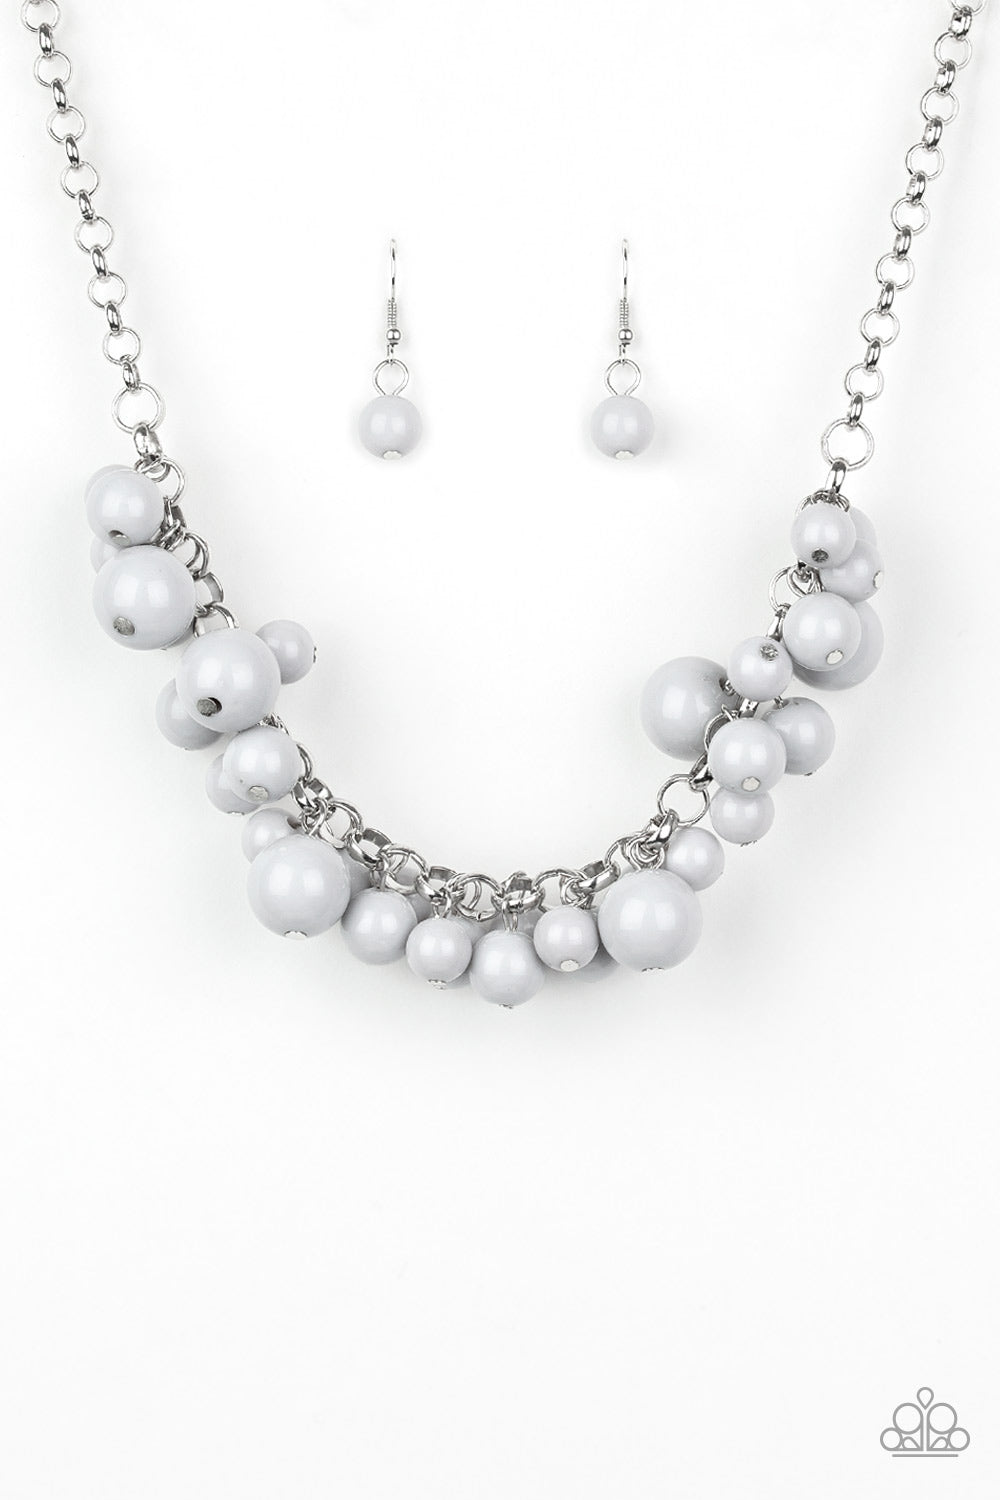 five-dollar-jewelry-walk-this-broadway-silver-necklace-paparazzi-accessories